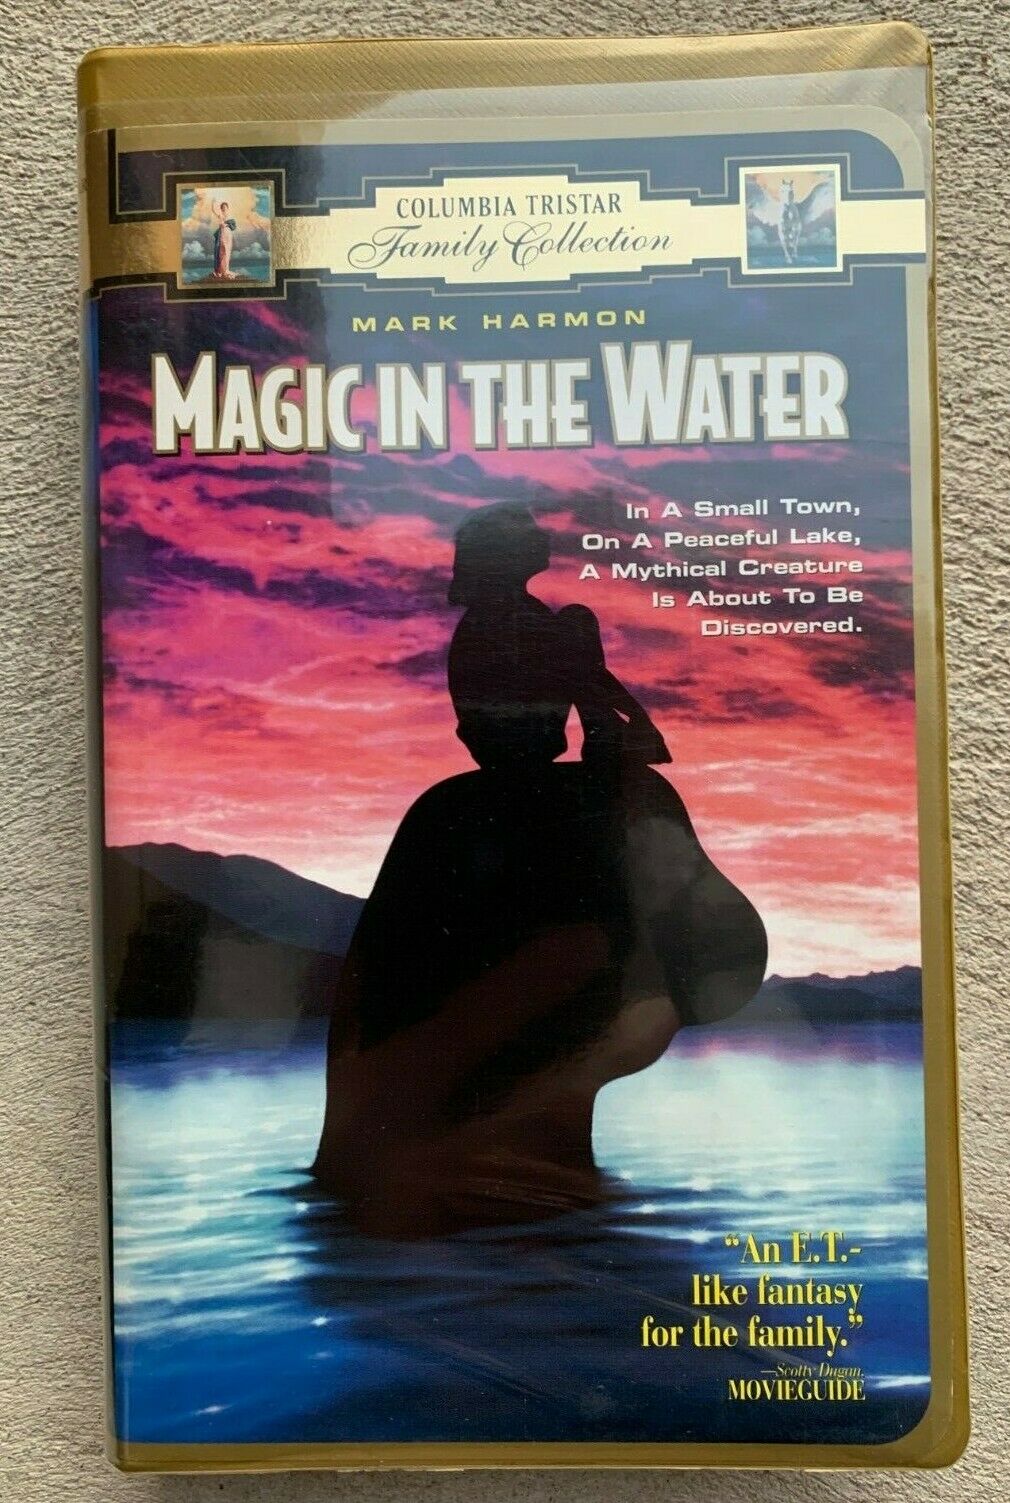 Magic in the Water (1996 VHS) | Angry Grandpa's Media Library Wiki | Fandom